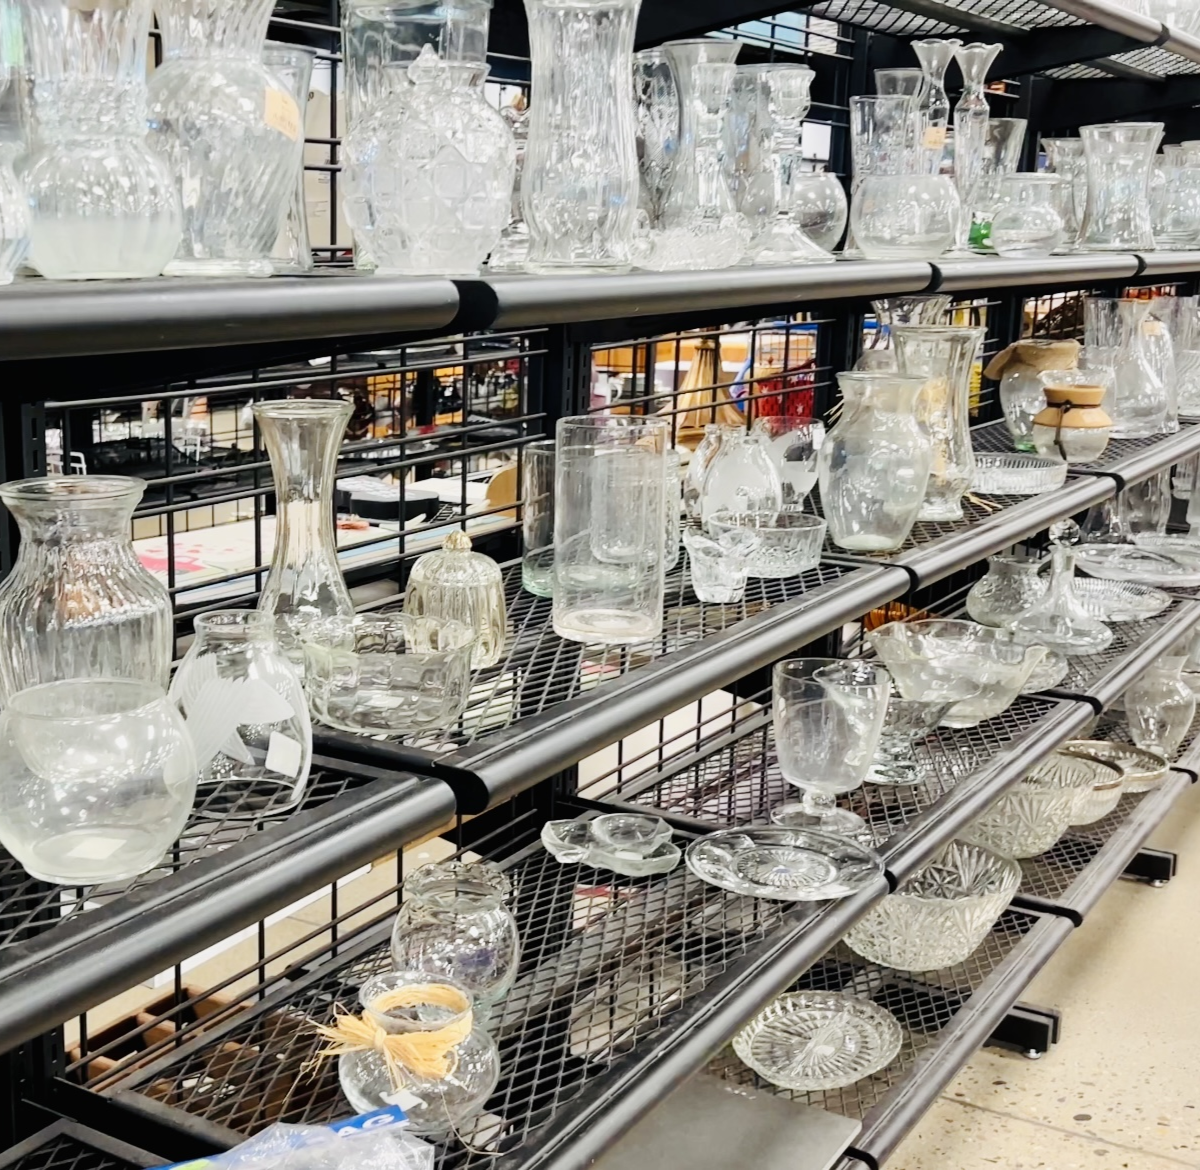 If you've ever found yourself at a thrift store with a stack of old dishes in front of you and wondered what to do with them, you're in the right place.